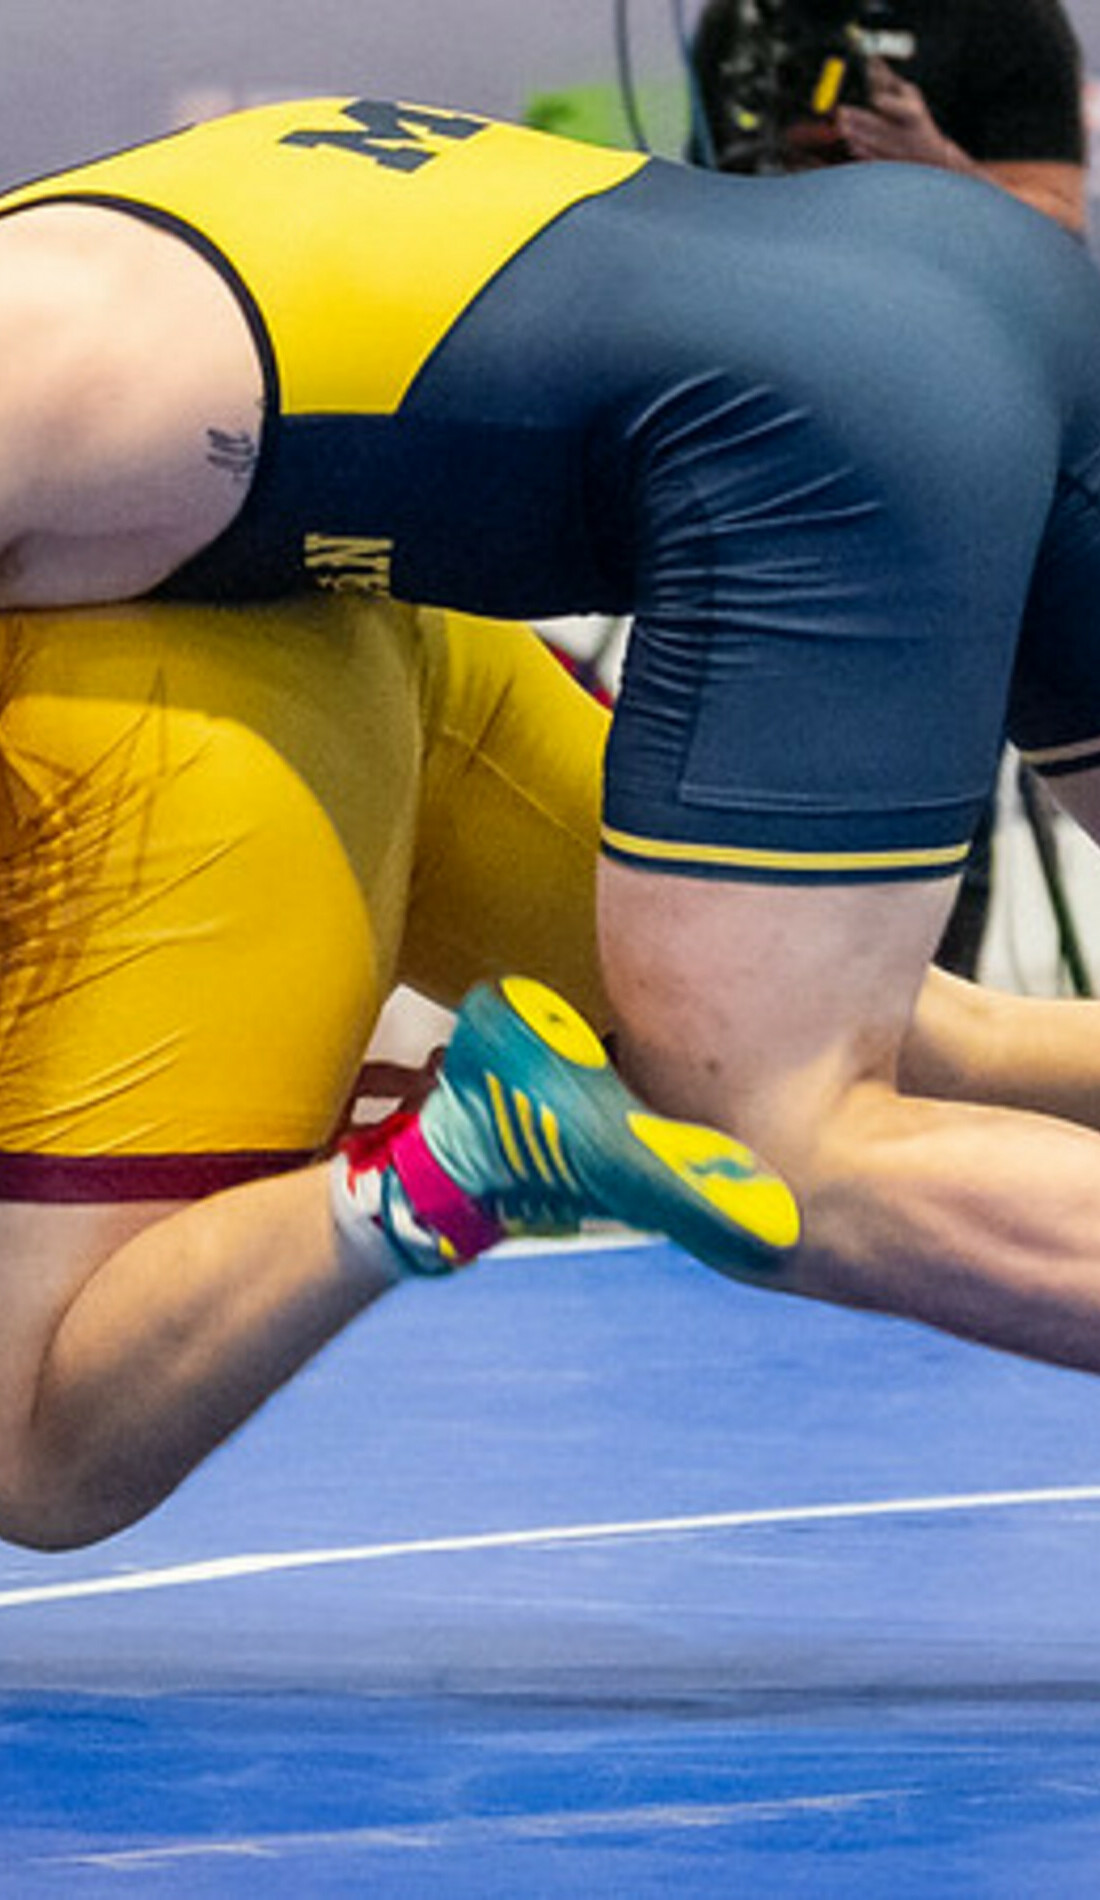 A Michigan Wolverines Wrestling live event